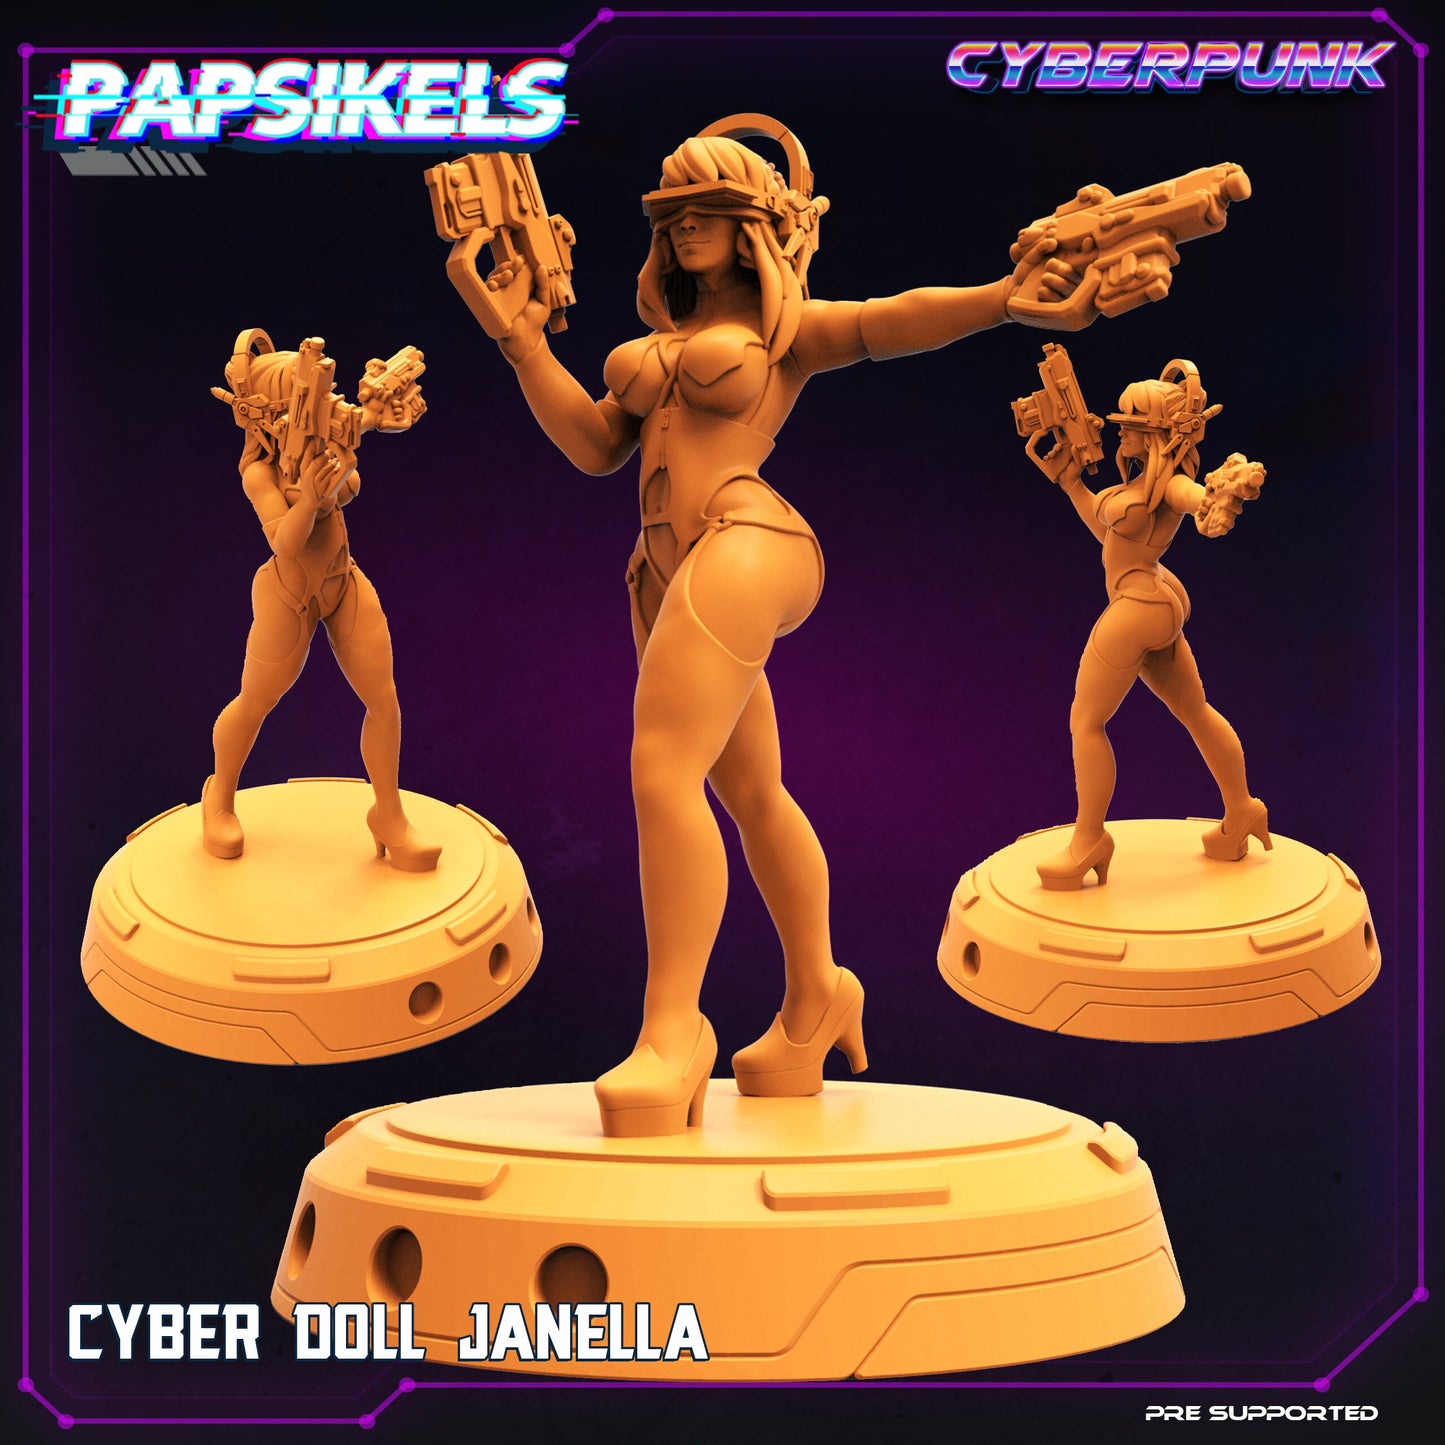 Cyberdoll Janella (sculpted by Papsikels)